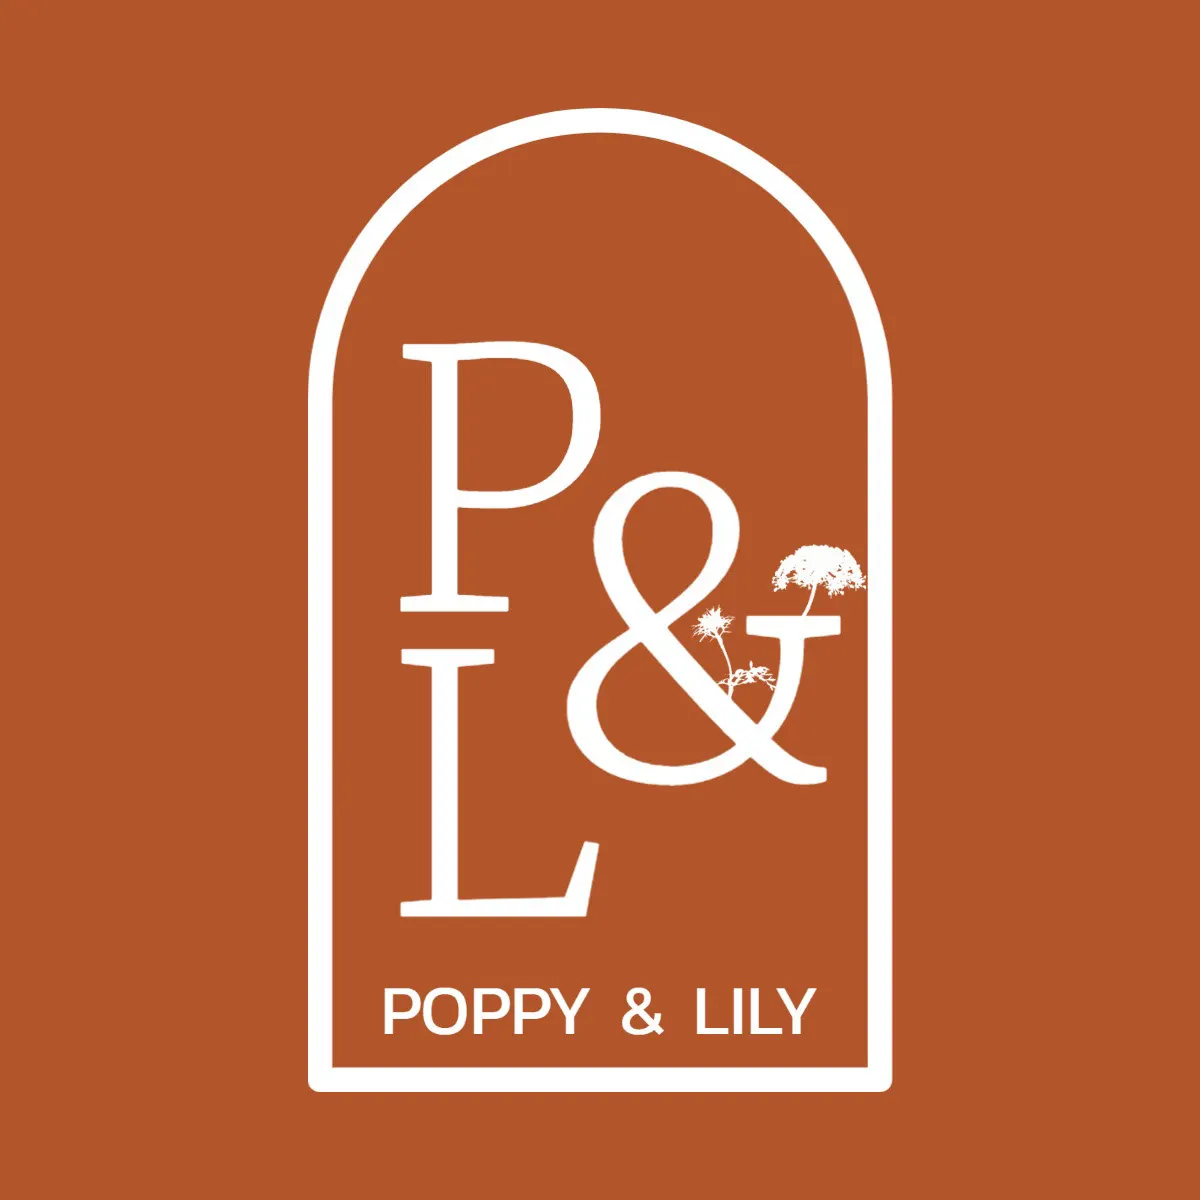 White And Brown Poppy And Lily Logo